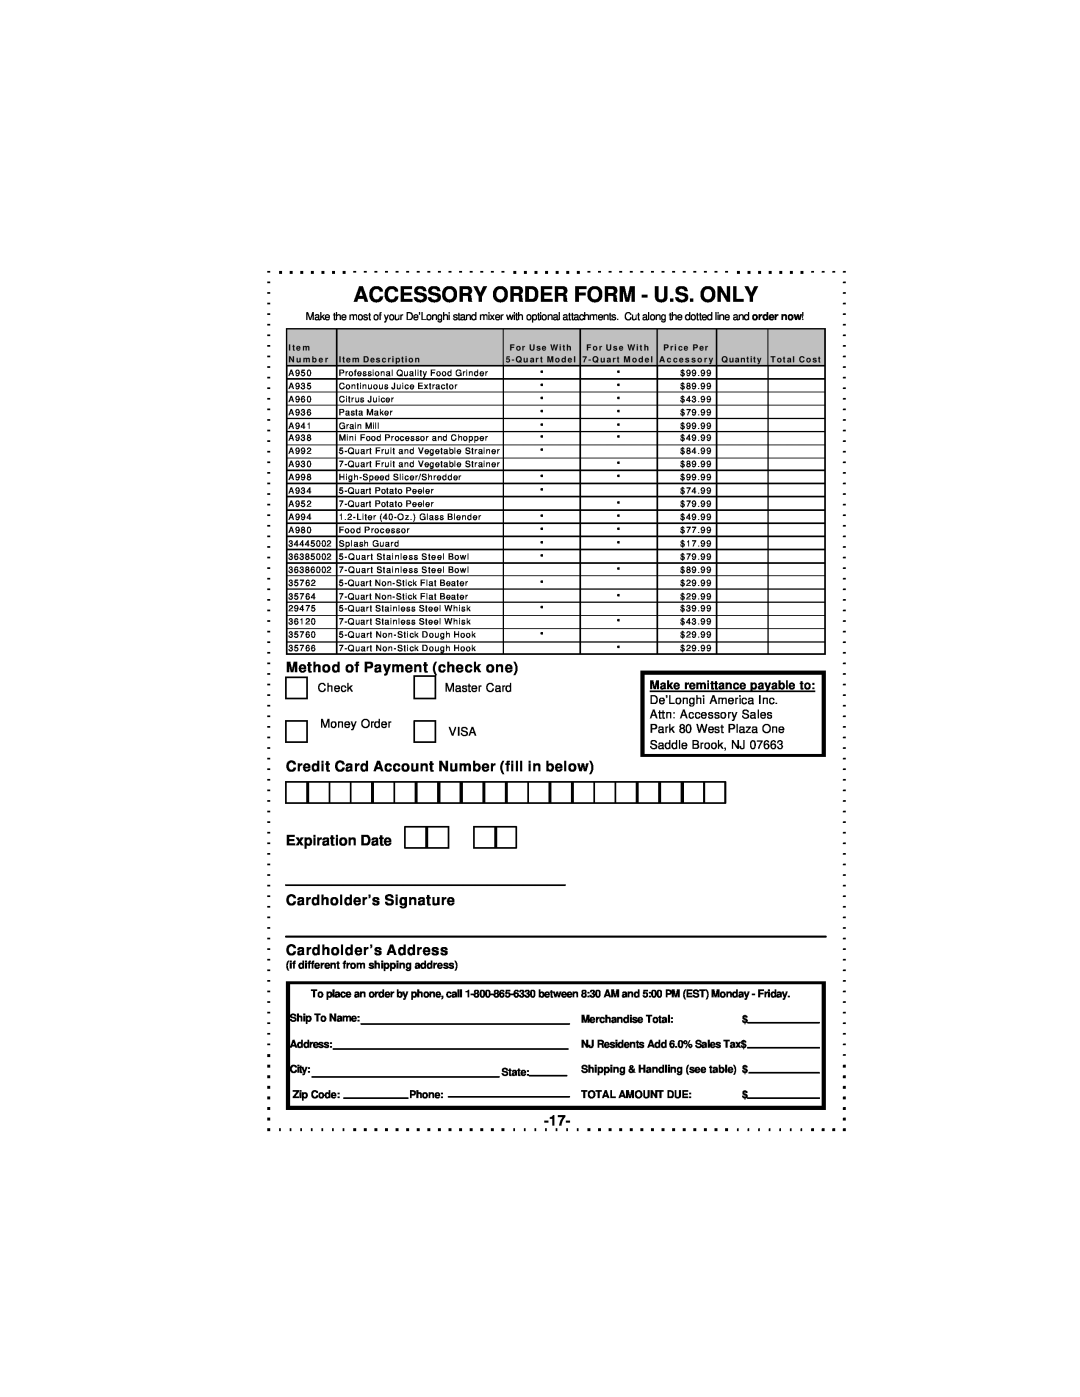 DeLonghi DSM5 - 7 Series Accessory Order Form - U.S. Only, Method of Payment check one, Cardholder’s Address 